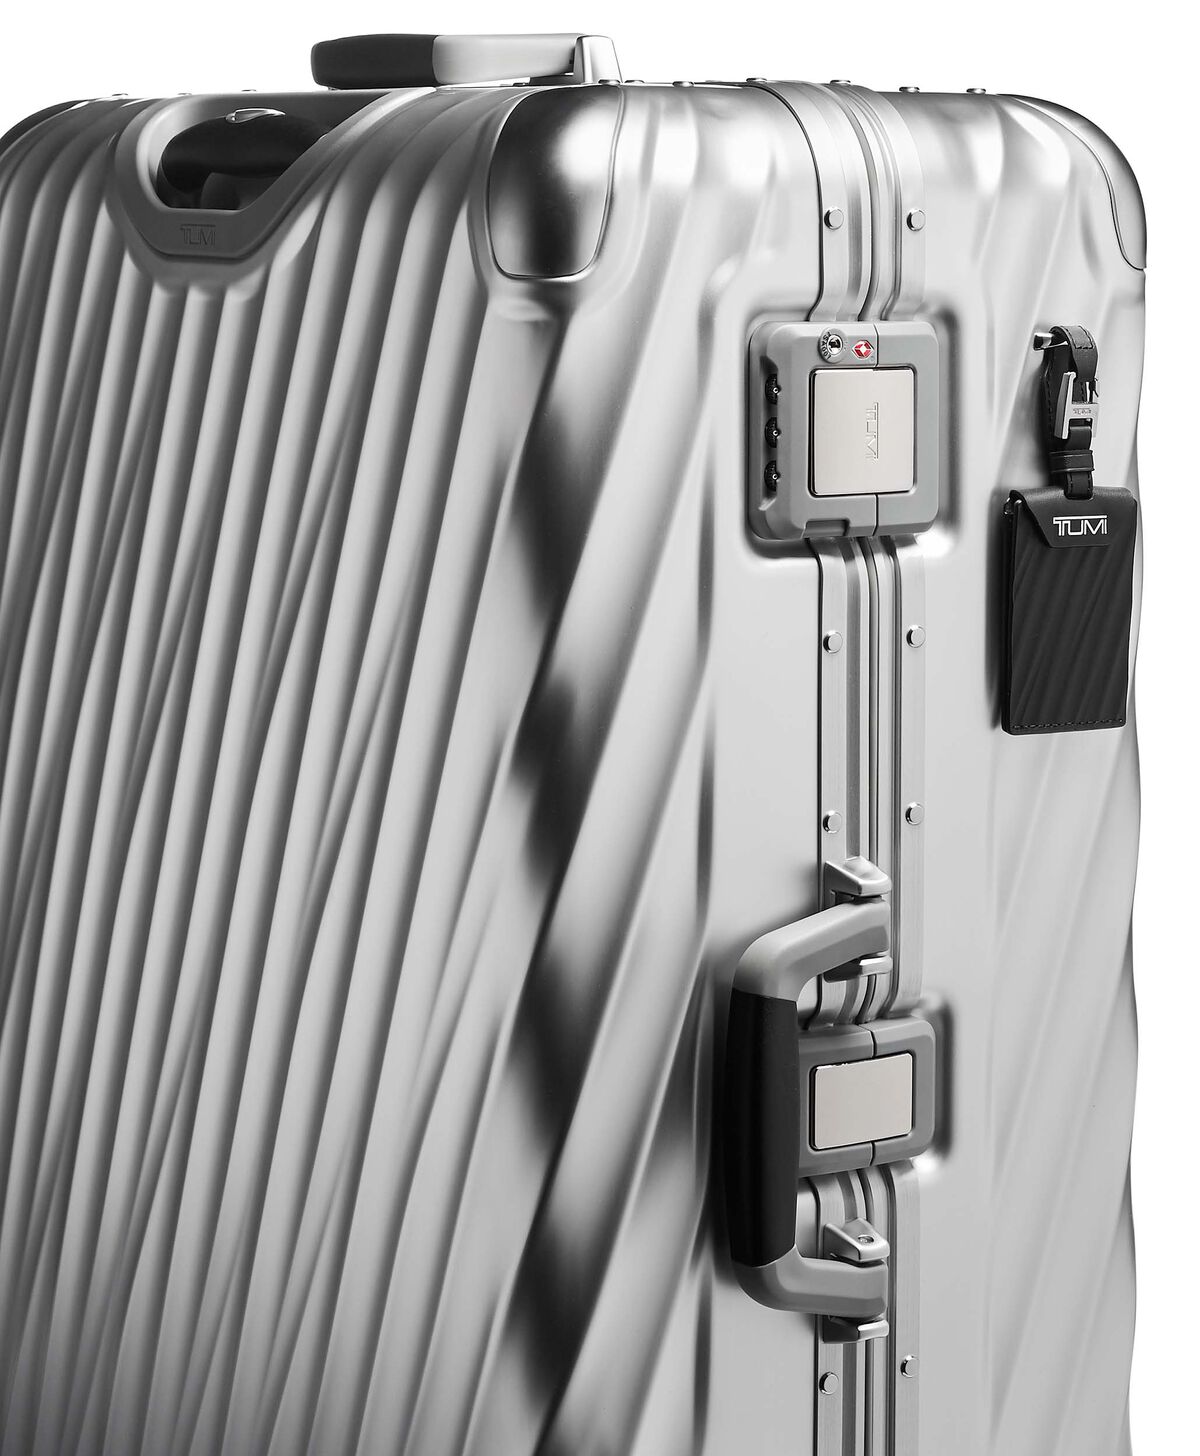 Tumi 19 Degree Aluminum EXTENDED TRIP PACKING Silver